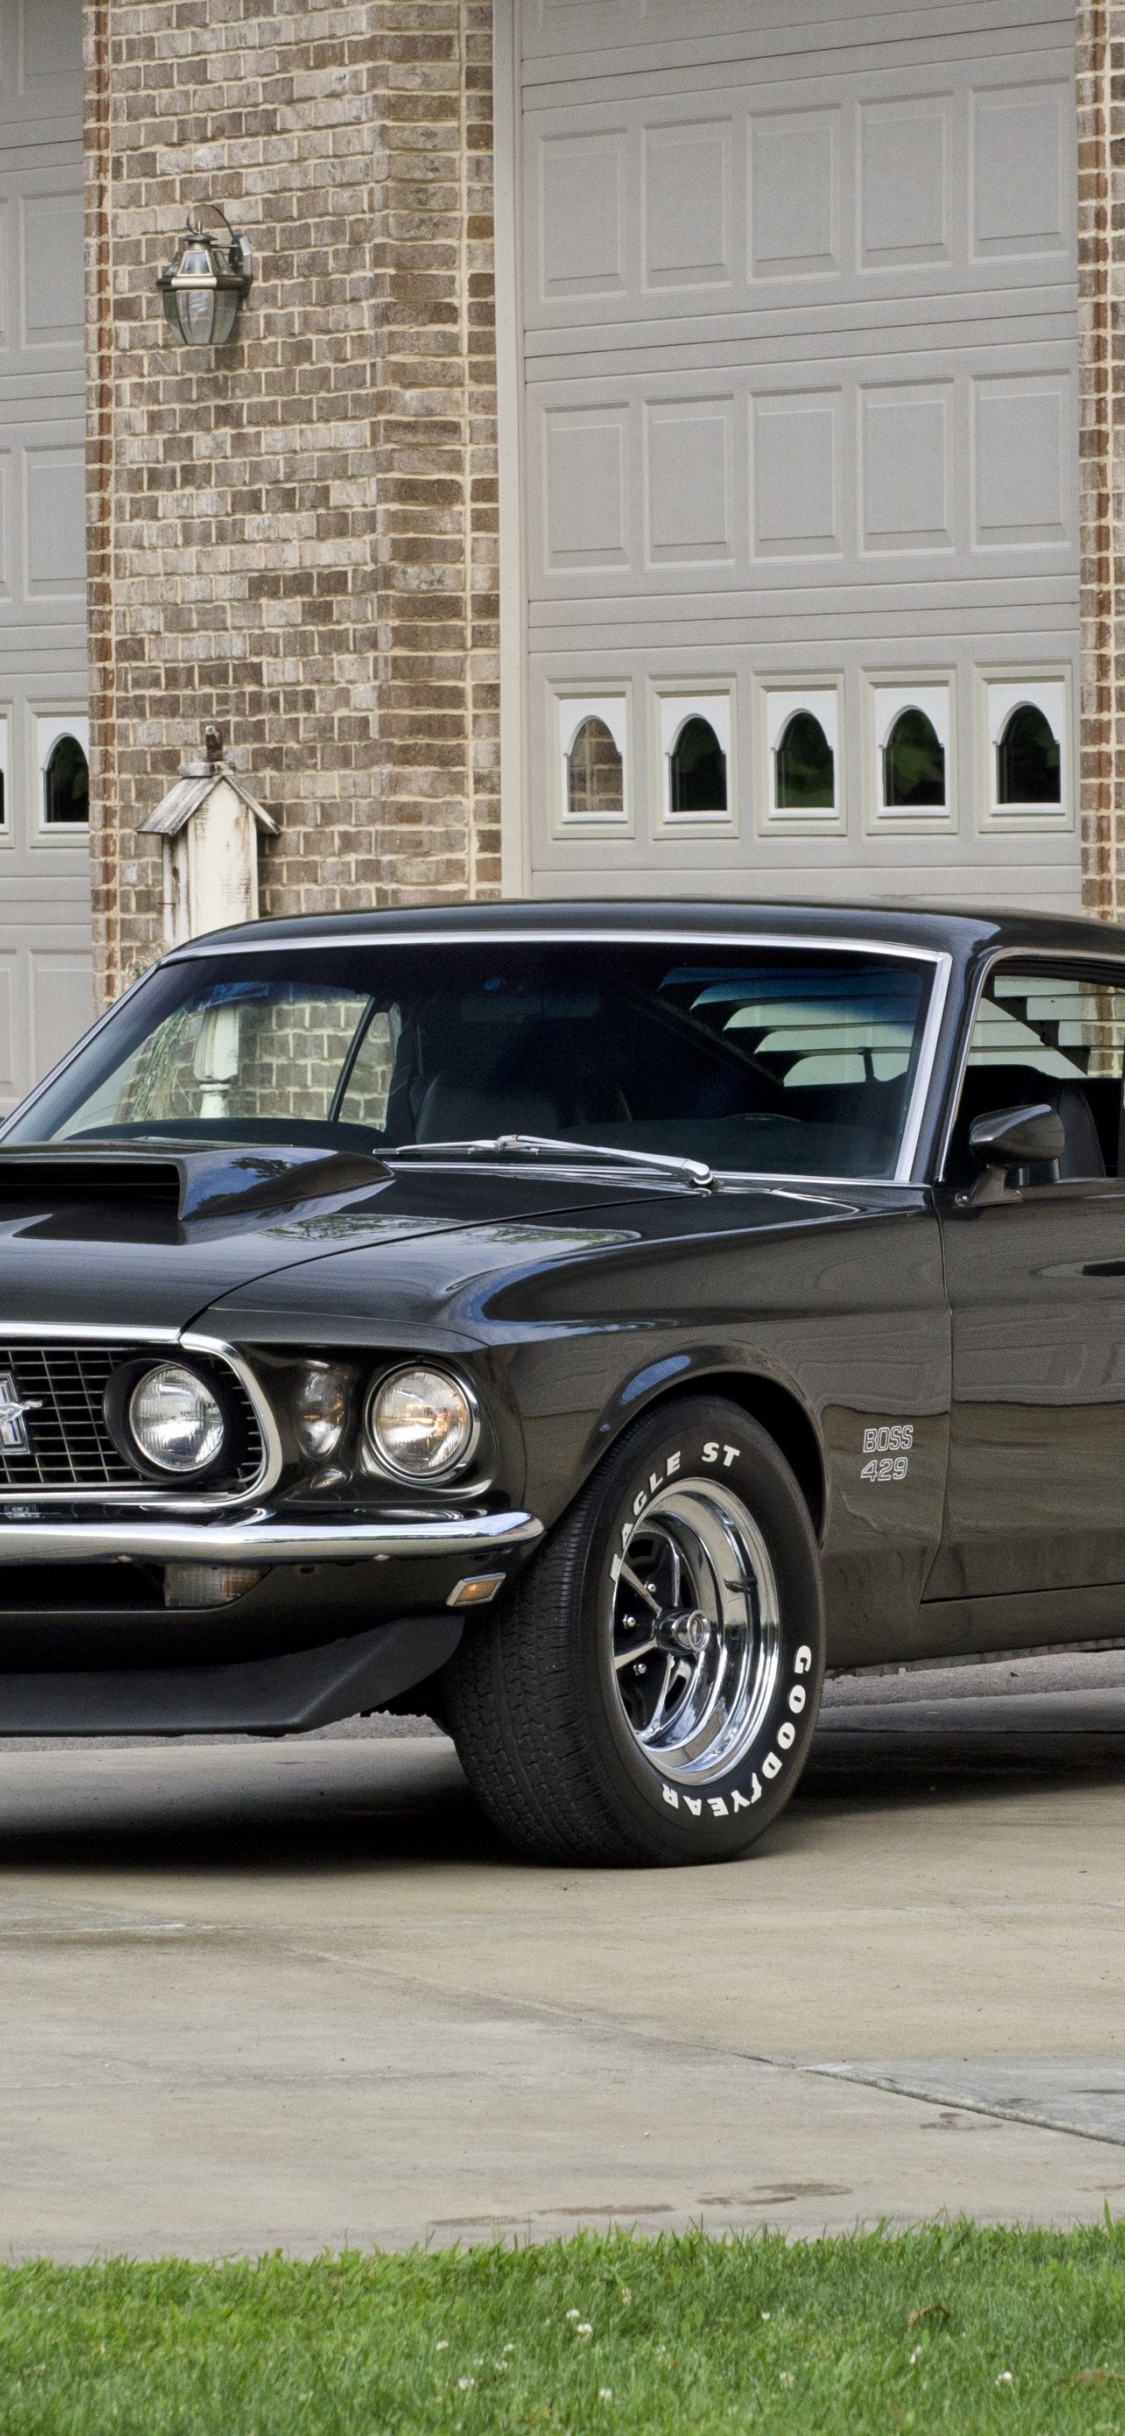 Download wallpaper 800x1200 boss muscle car ford 1969 red 429 mustang  iphone 4s4 for parallax hd background